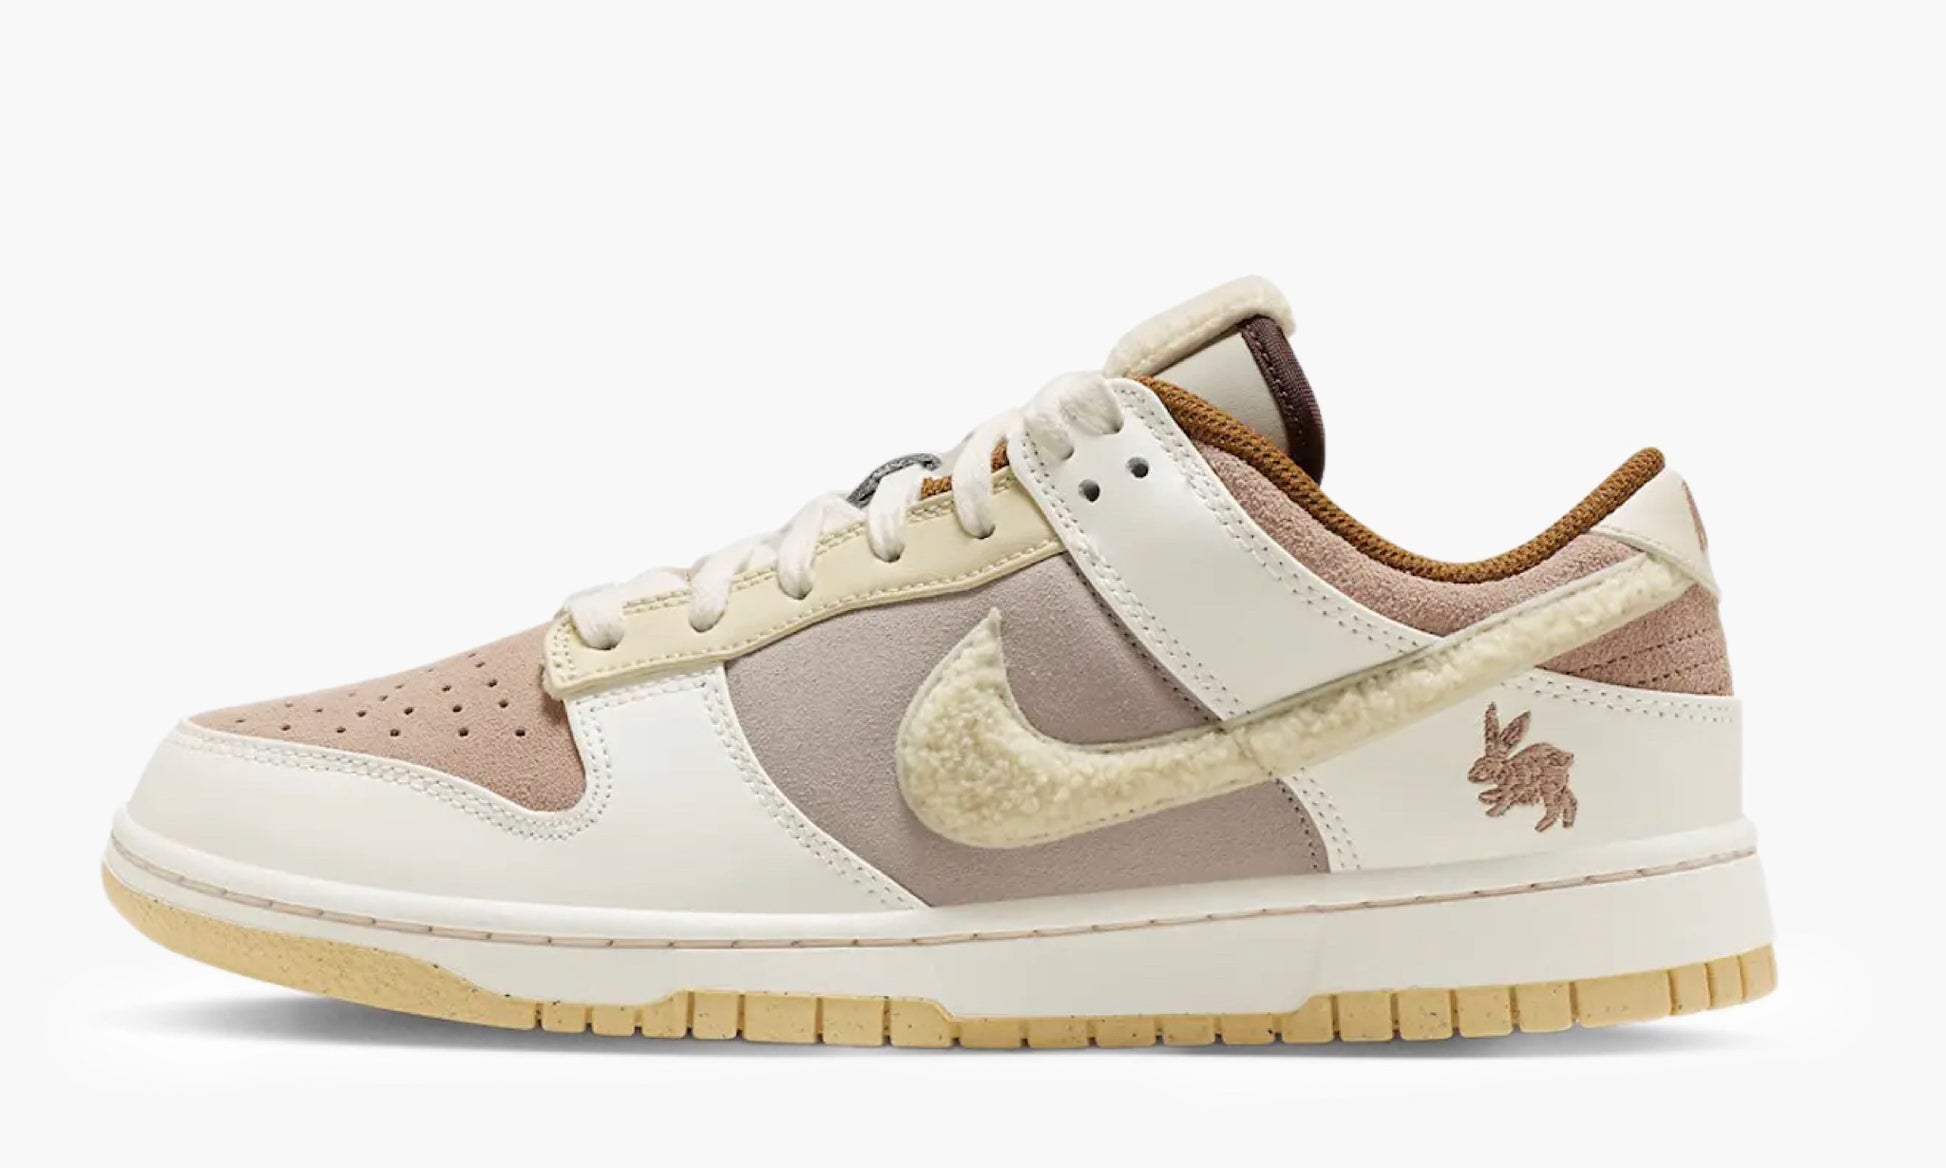 Dunk Low Retro PRM Year of the Rabbit Mocha Brows - FD4203 211 | The Sortage